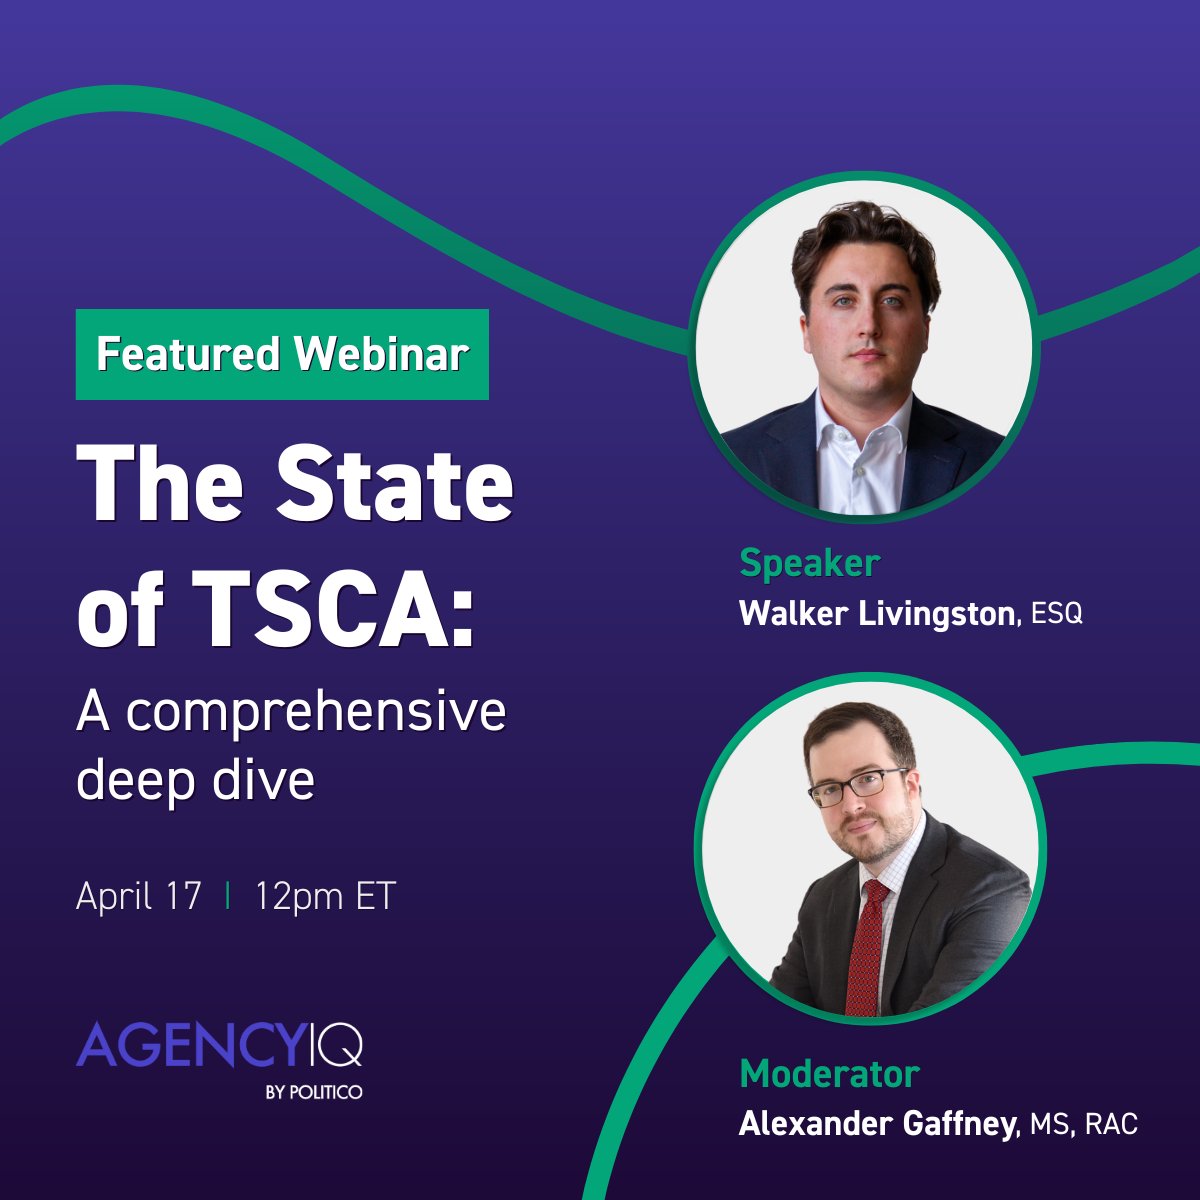 Don’t miss out, register here: bit.ly/3vtMT2V to join us tomorrow, Wednesday, April 17, at 12pm ET, for a free webinar delving deep into the EPA's administration of TSCA and looking ahead at what we can expect for the future.
#AgencyIQ #Politico #Chemicals #Webinar #TSCA